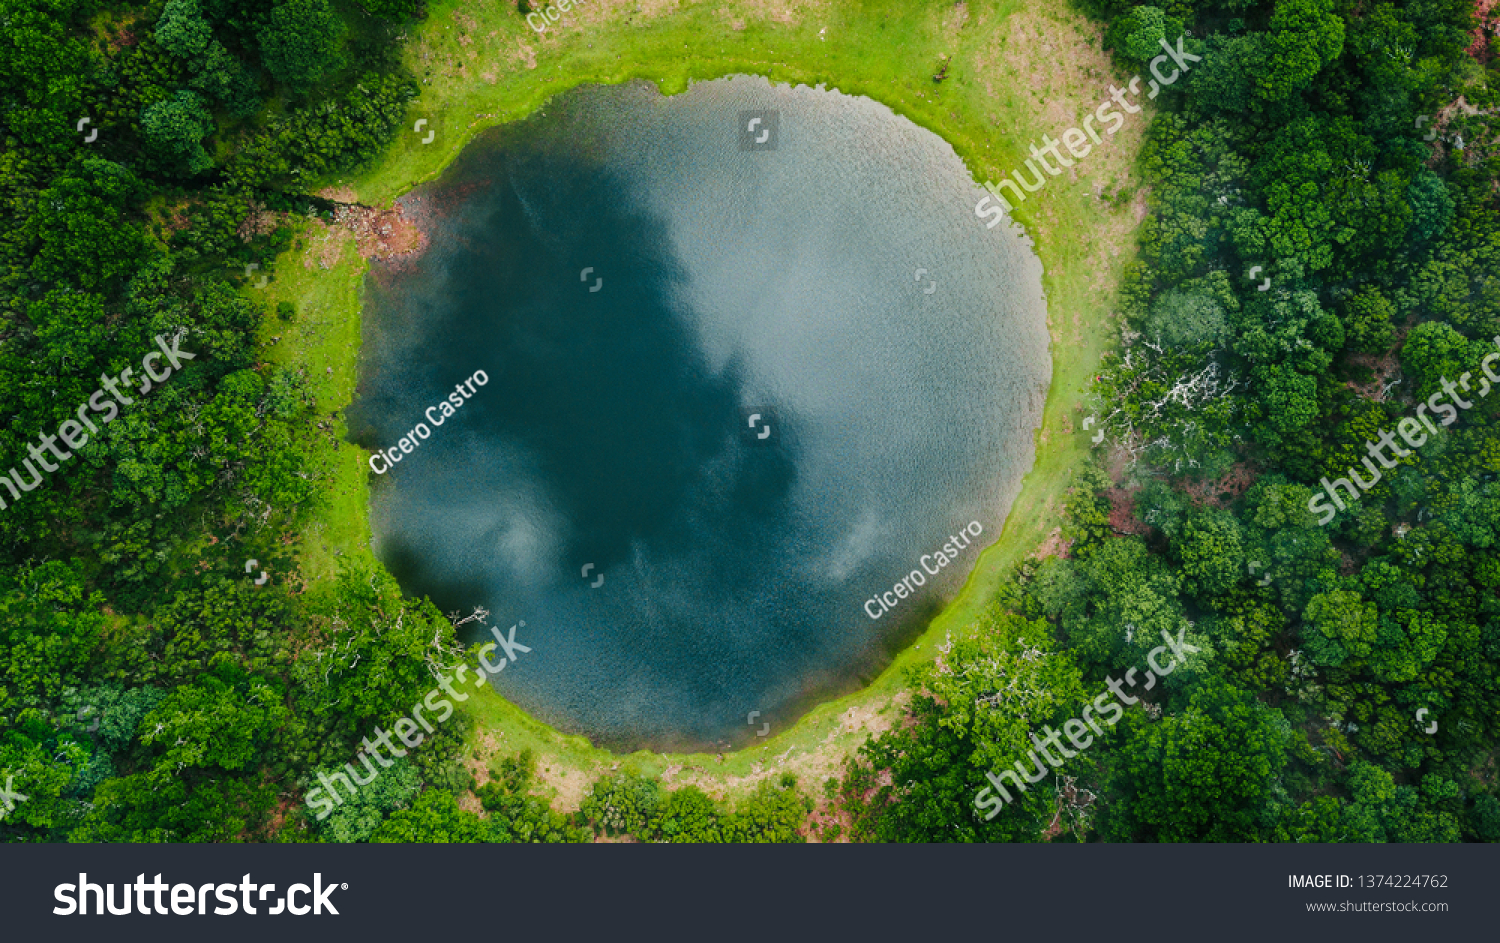 Aerial view of natural pond surrounded by pine trees in Fanal, Madeira island, Portugal #1374224762